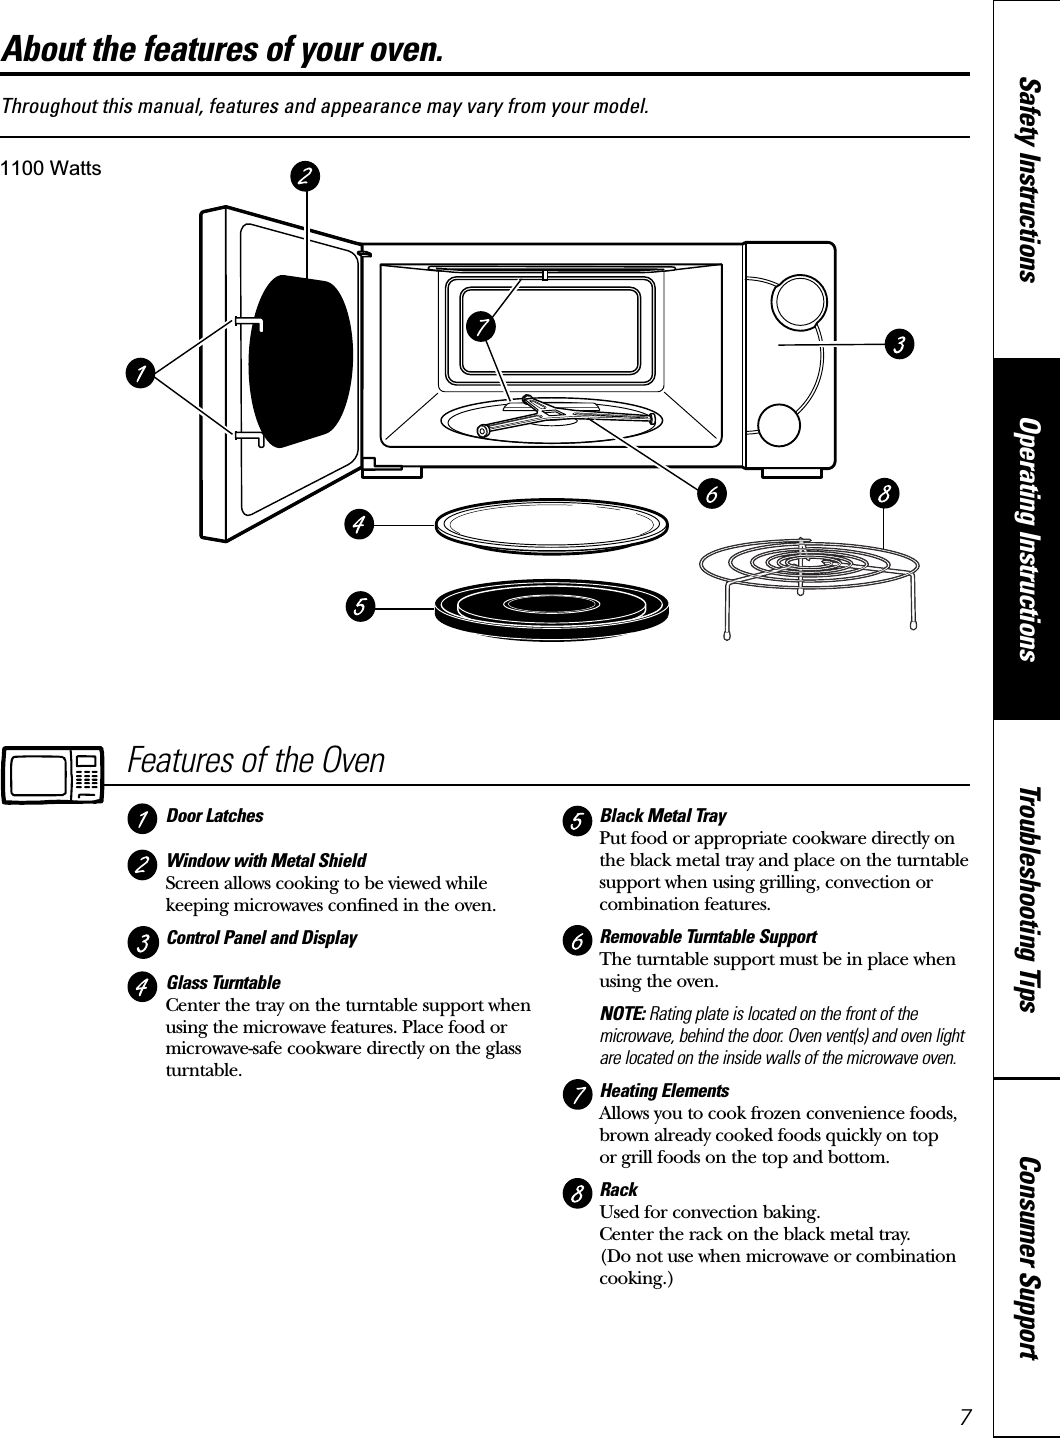 7Consumer SupportTroubleshooting TipsOperating InstructionsSafety InstructionsThroughout this manual, features and appearance may vary from your model.1000 WattsFeatures of the OvenDoor LatchesWindow with Metal ShieldScreen allows cooking to be viewed whilekeeping microwaves confined in the oven.Control Panel and DisplayGlass TurntableCenter the tray on the turntable support whenusing the microwave features. Place food ormicrowave-safe cookware directly on the glassturntable.Black Metal Tray Put food or appropriate cookware directly onthe black metal tray and place on the turntablesupport when using grilling, convection orcombination features.Removable Turntable Support The turntable support must be in place whenusing the oven.NOTE: Rating plate is located on the front of themicrowave, behind the door. Oven vent(s) and oven lightare located on the inside walls of the microwave oven.Heating Elements Allows you to cook frozen convenience foods,brown already cooked foods quickly on top or grill foods on the top and bottom.RackUsed for convection baking.Center the rack on the black metal tray. (Do not use when microwave or combinationcooking.)About the features of your oven. www.GEAppliances.ca1100 Watts